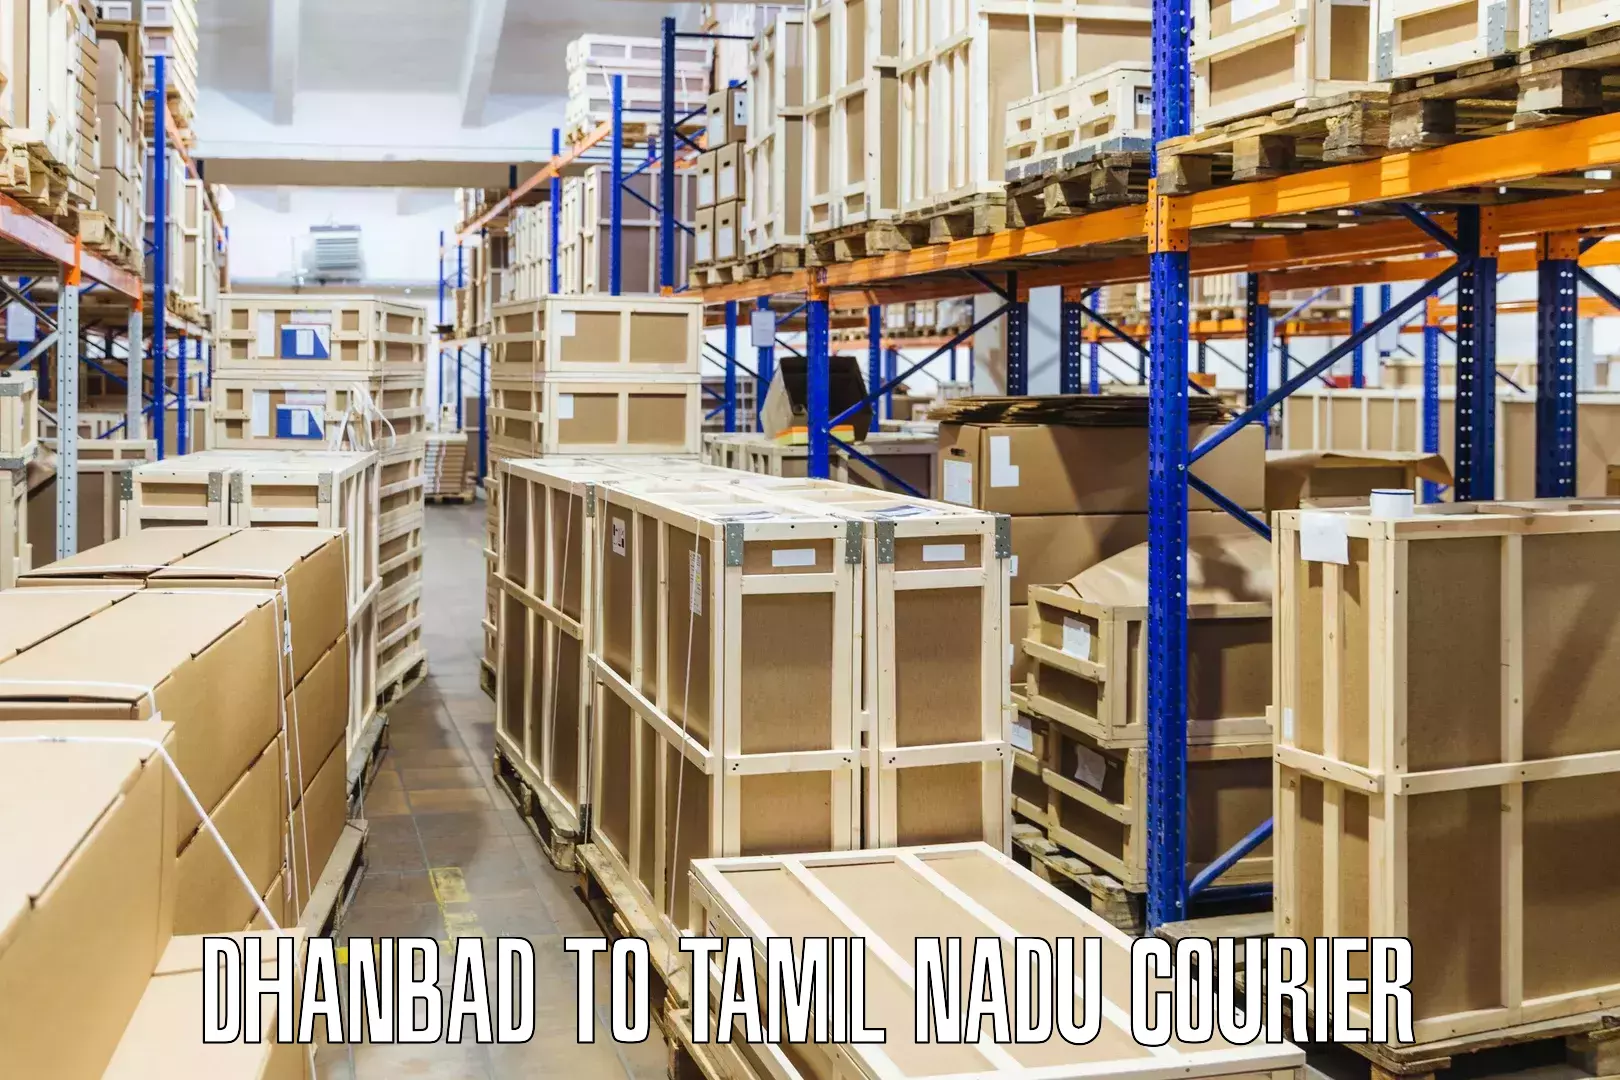 Multi-national courier services Dhanbad to Rajapalayam